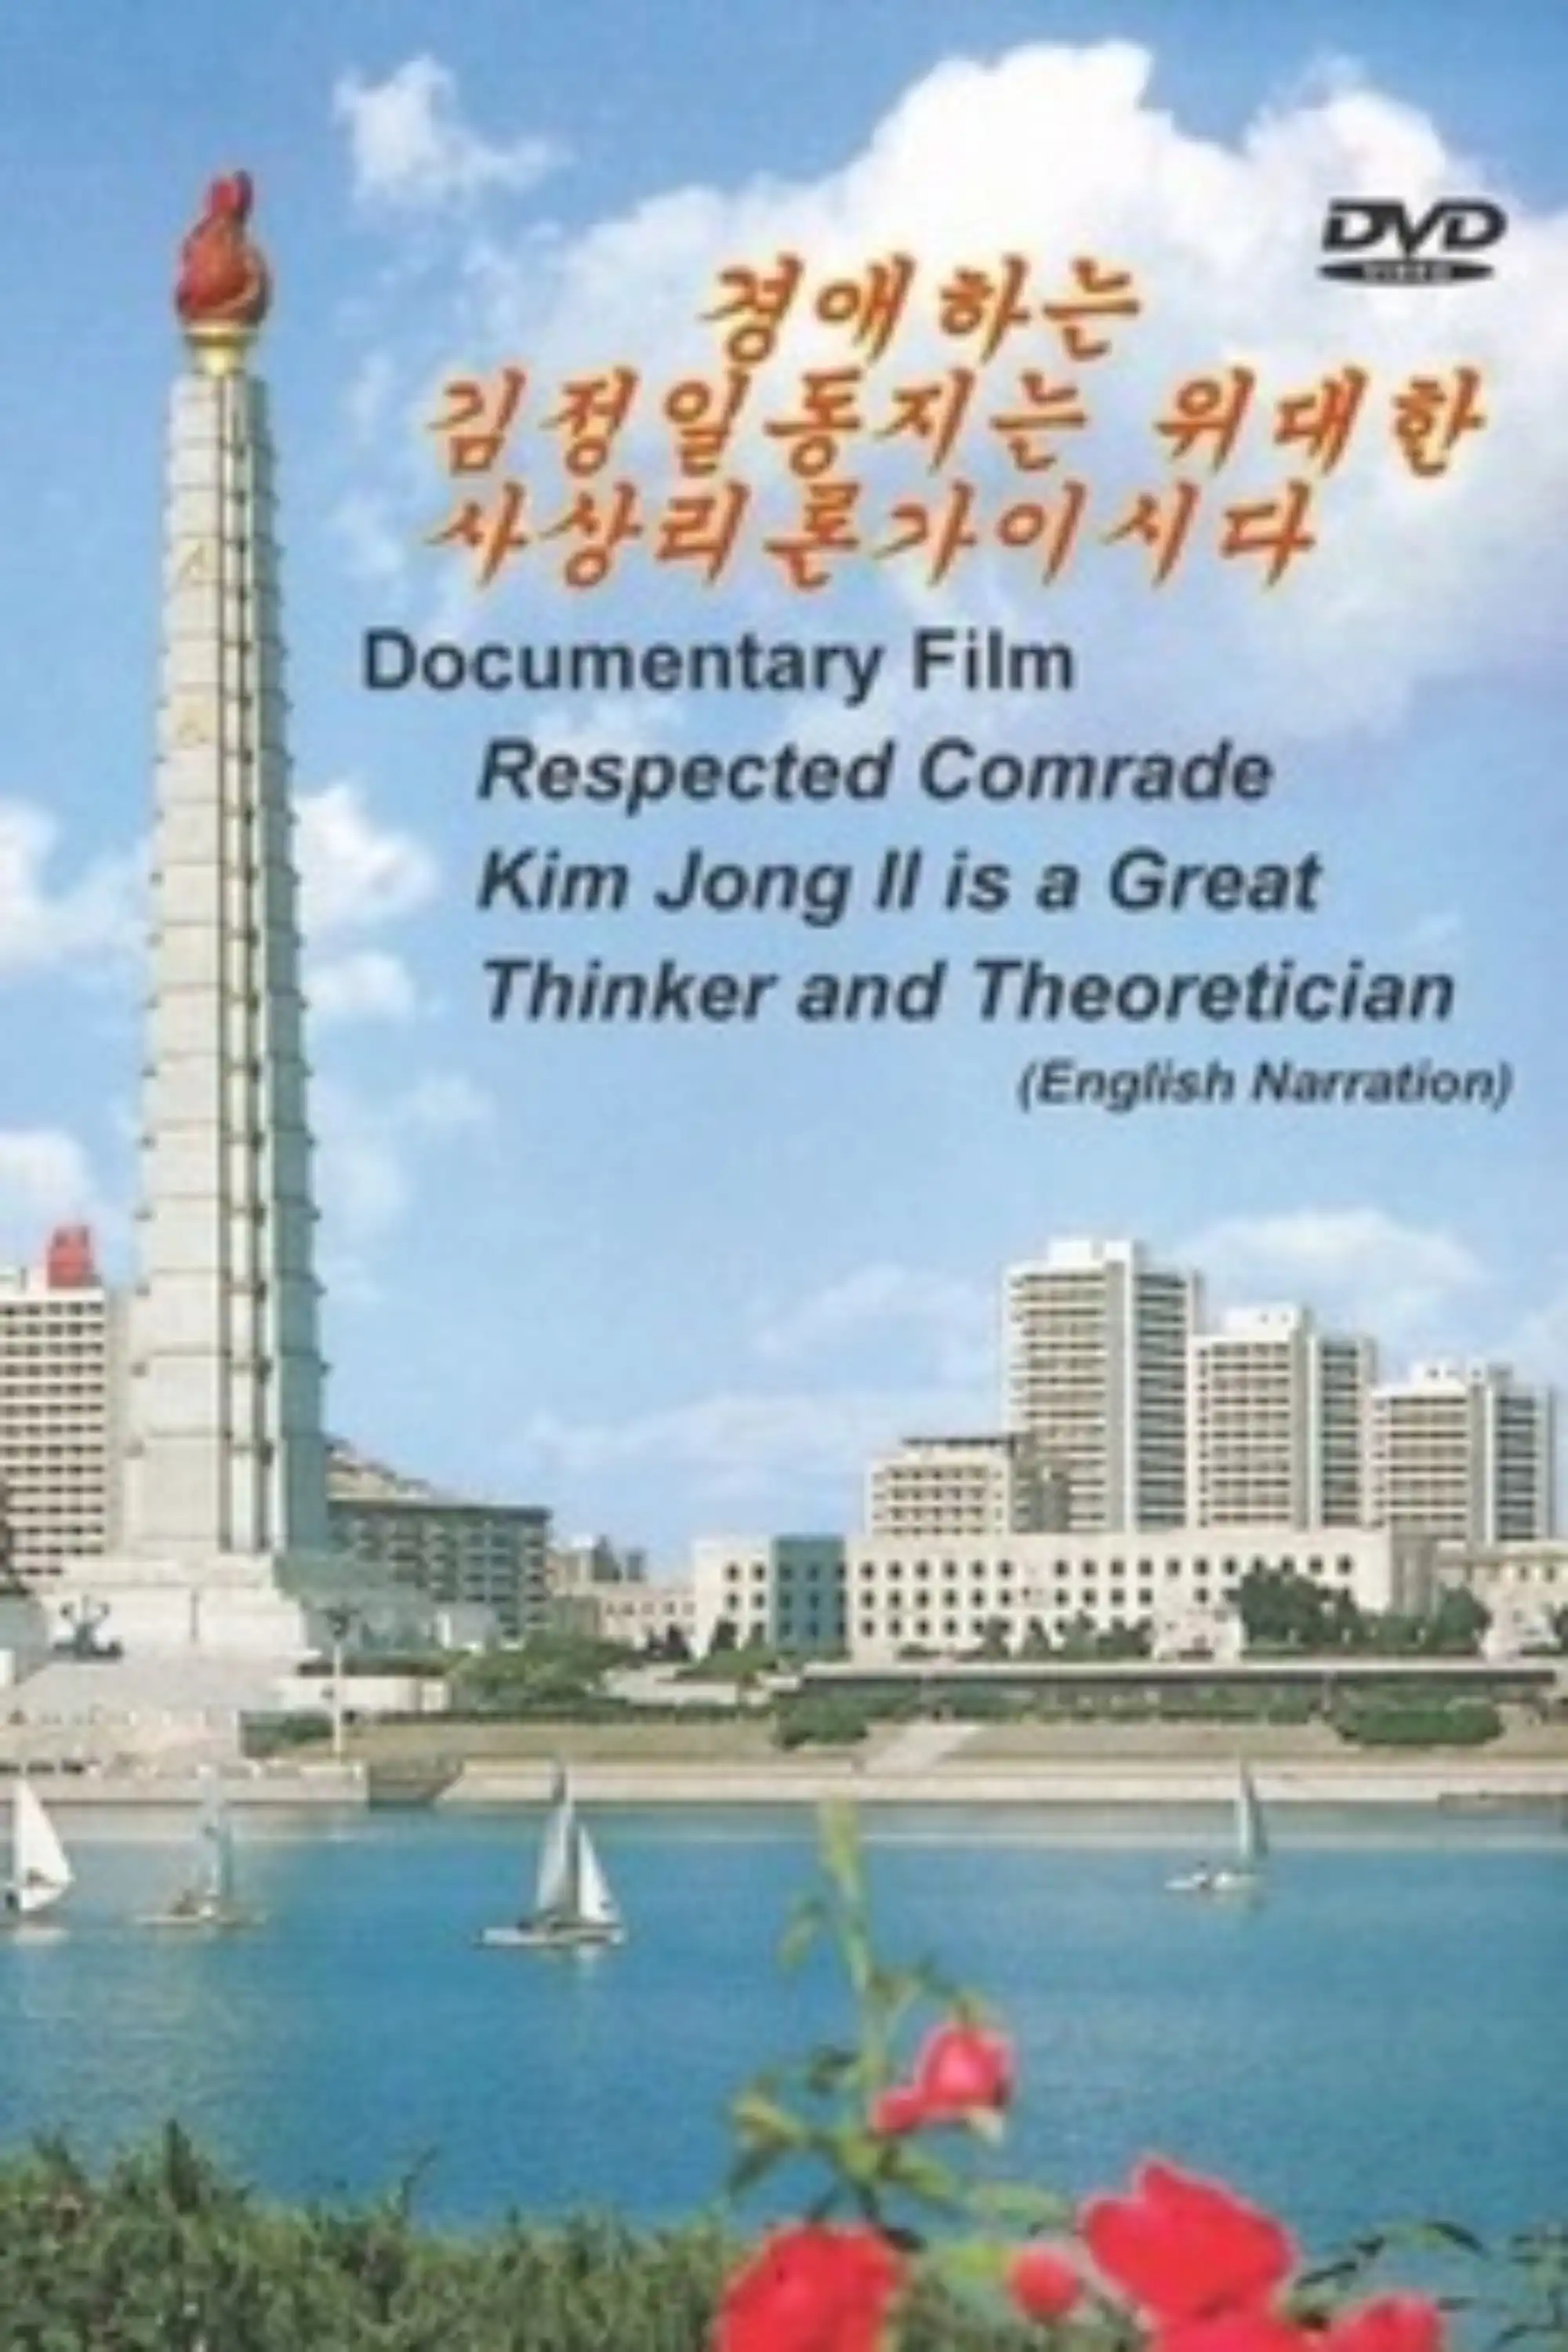 Watch and Download Respected Comrade Kim Jong Il is a Great Thinker and Theoretician 1